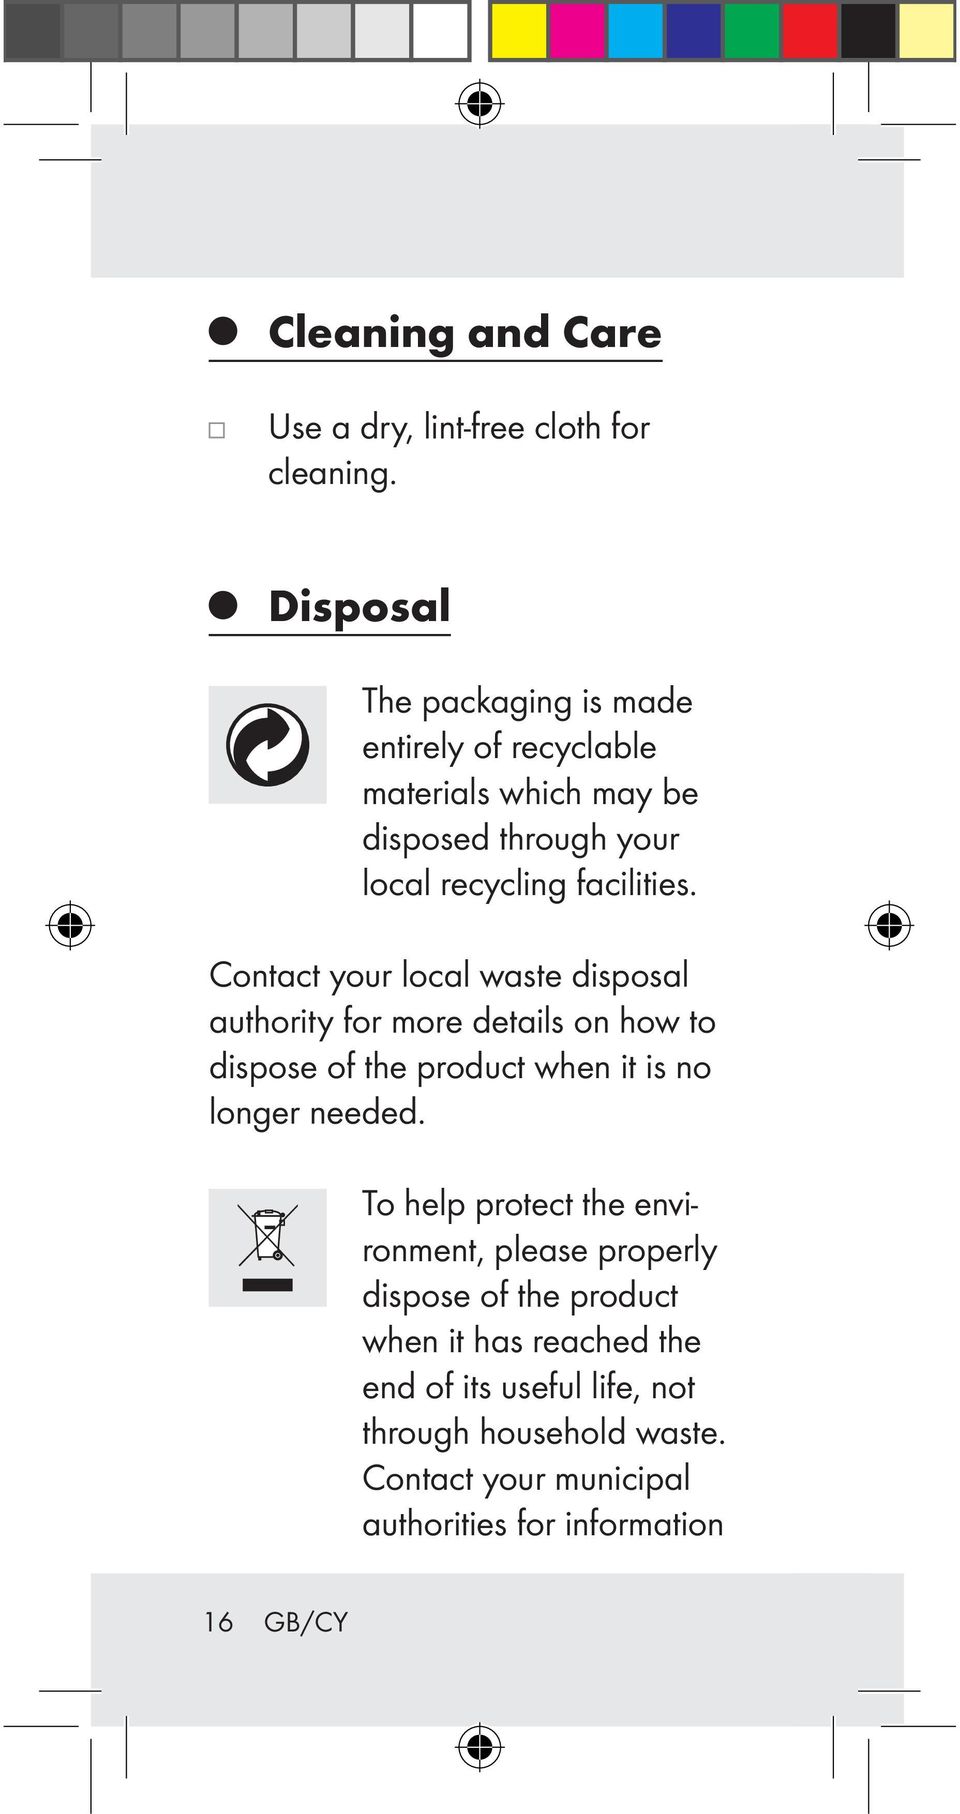 Contact your local waste disposal authority for more details on how to dispose of the product when it is no longer needed.